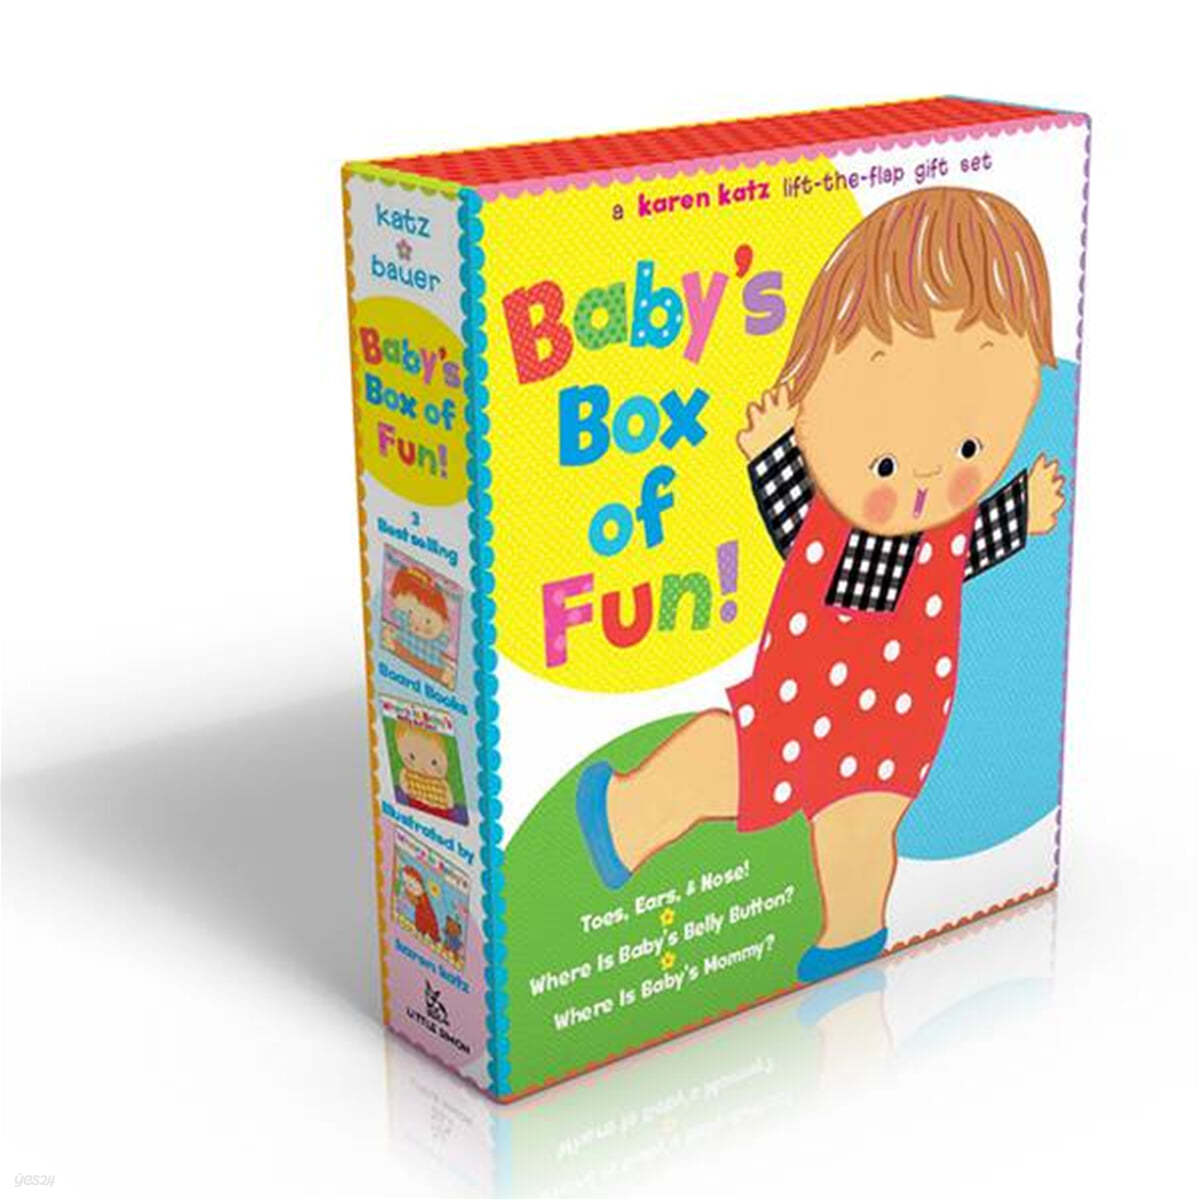 Baby&#39;s Box of Fun: A Karen Katz Lift-The-Flap Gift Set: Toes, Ears, &amp; Nose]/Where Is Baby&#39;s Belly Button?/Where Is Baby&#39;s Mommy?